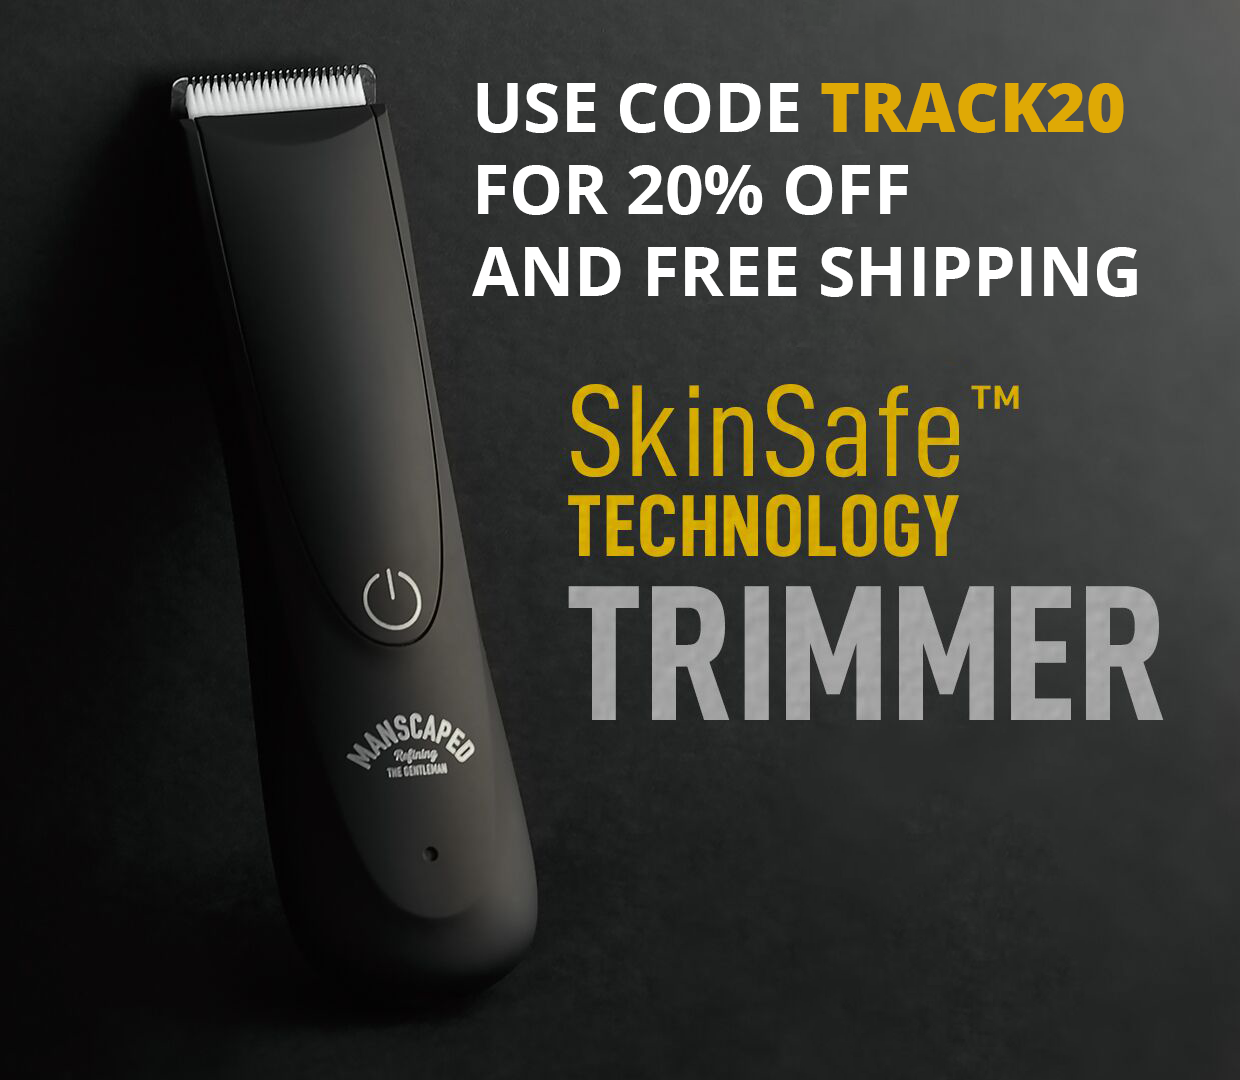 Use code TRACK20 for 20% off and free shipping from Manscaped